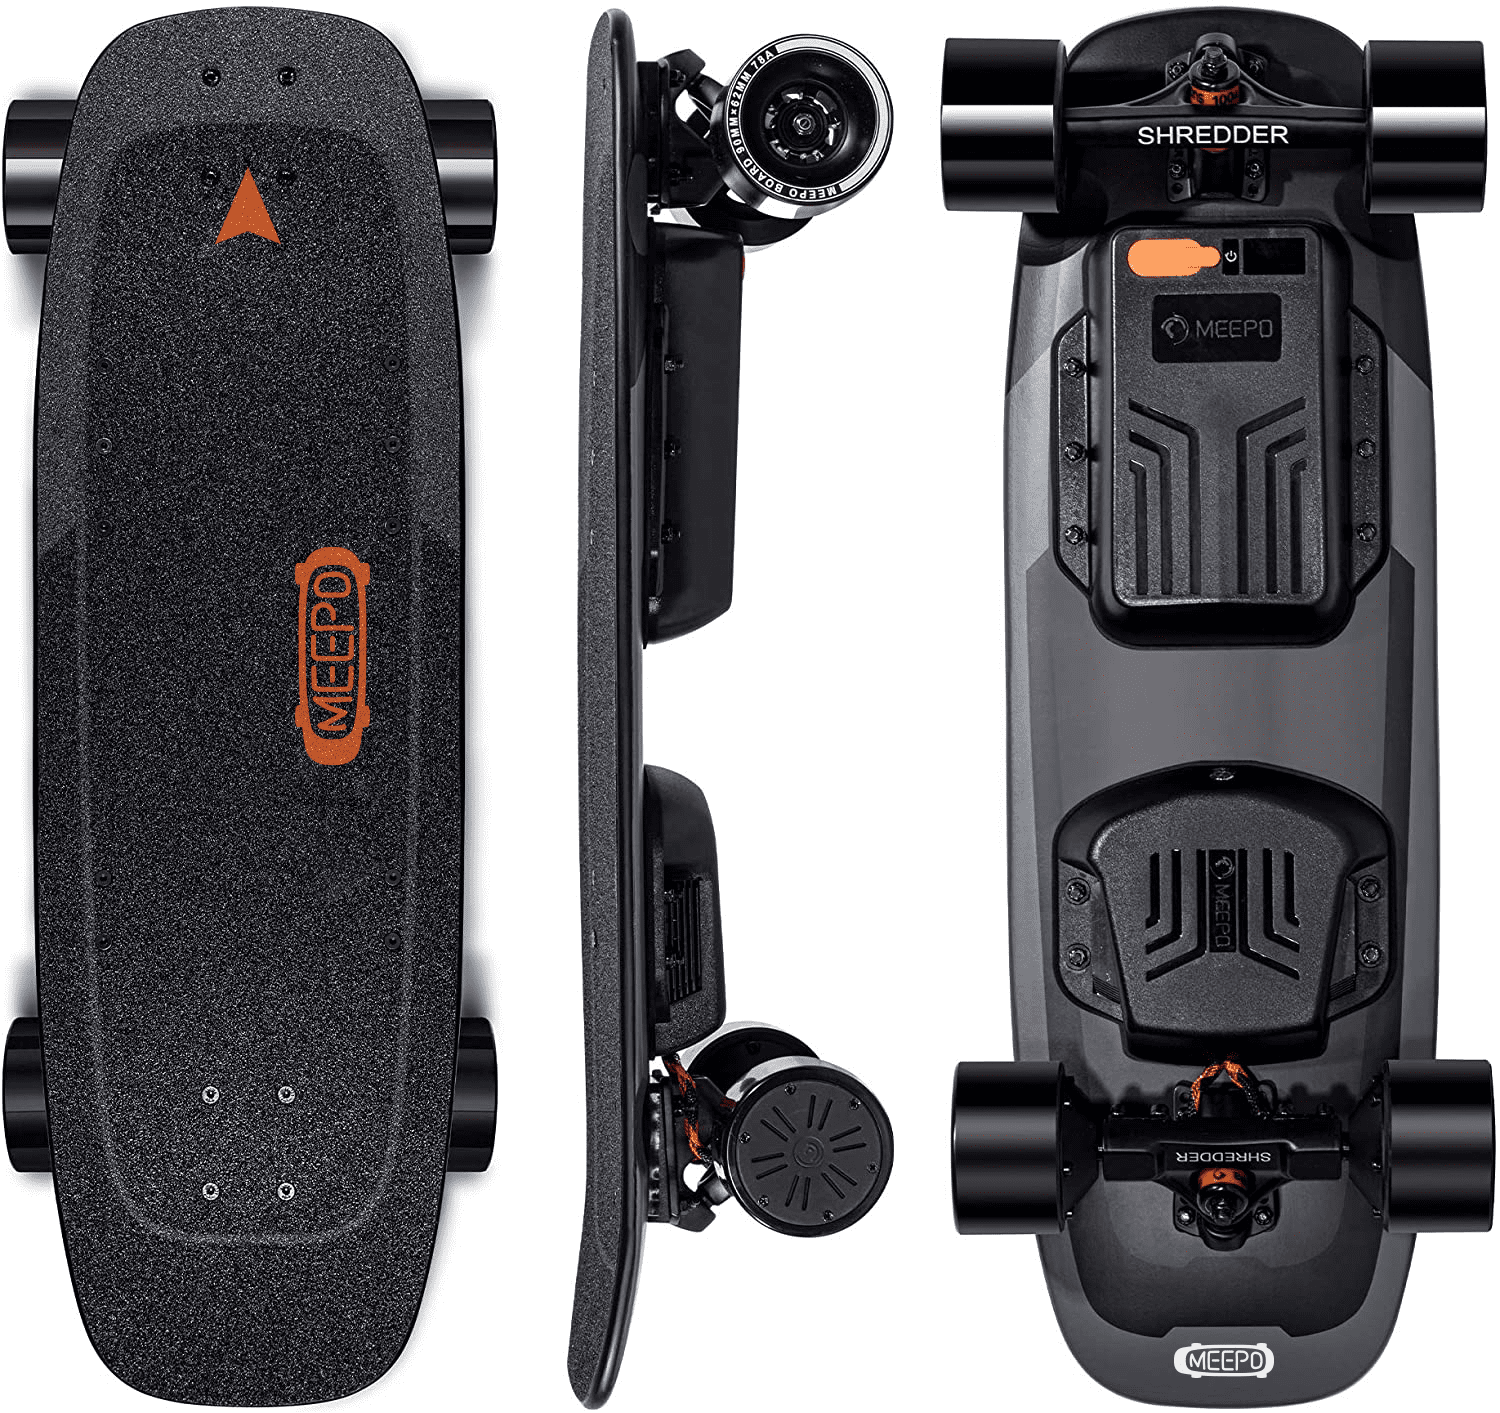 Meepo Mini 2 Electric Skateboard with Remote,90mm wheels, Top Speed - 28  mph ,6 Months Warranty Skateboard Cruiser for Adults Teens